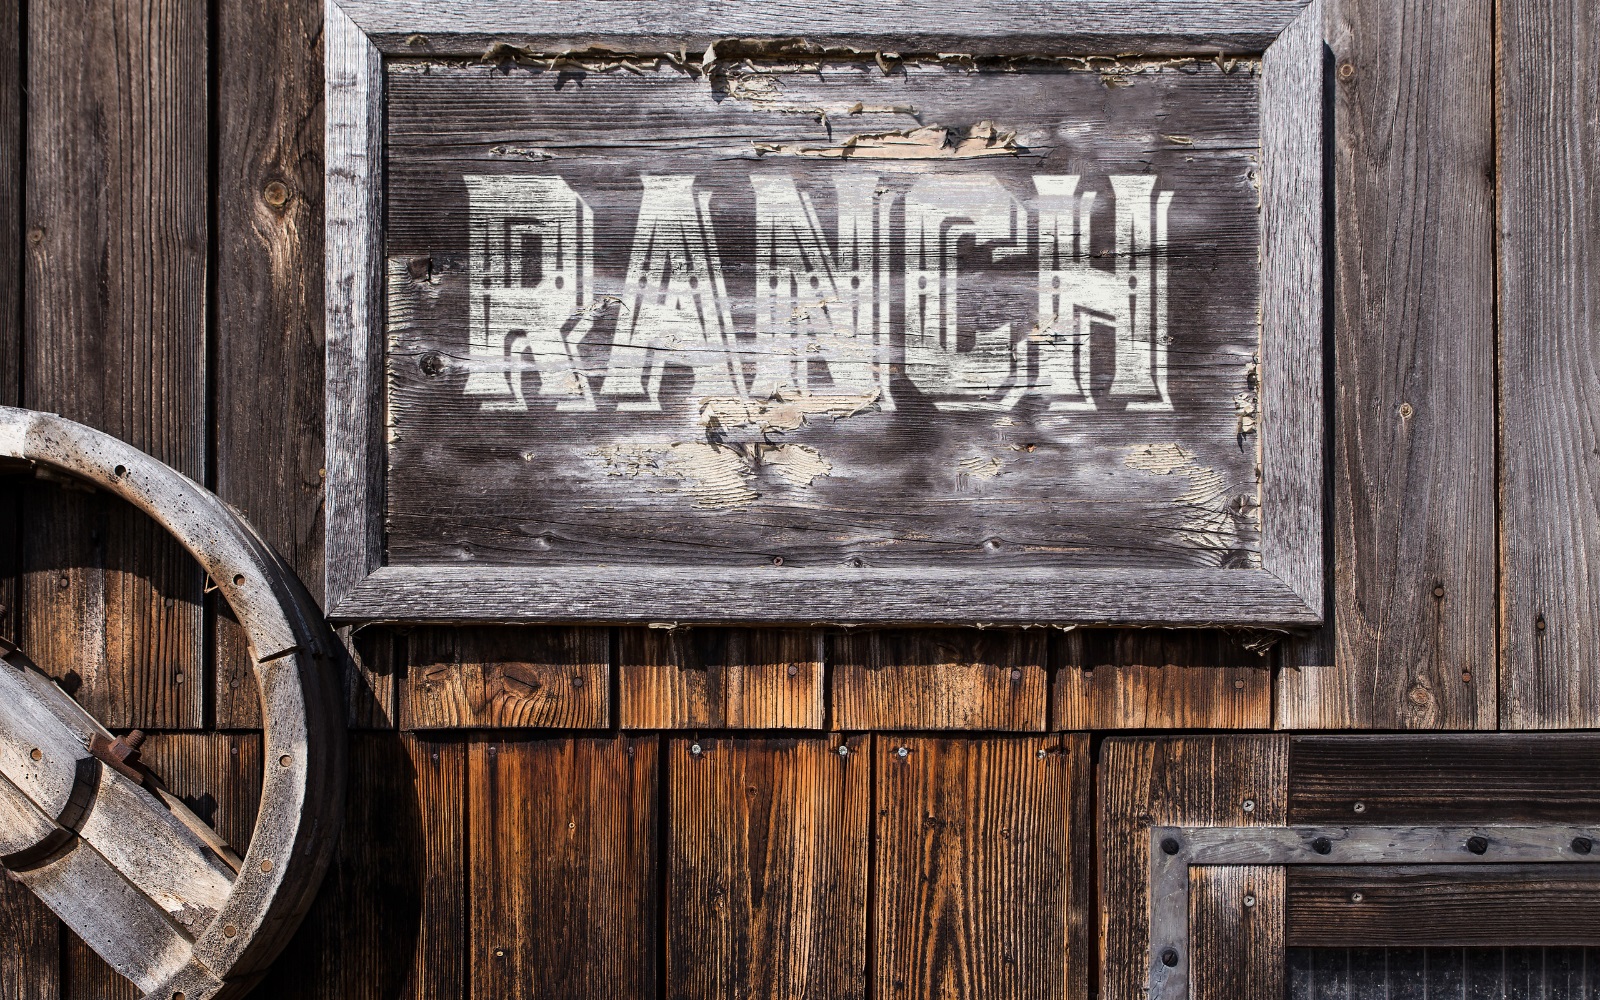 Helpful Tips For Naming Your Ranch
